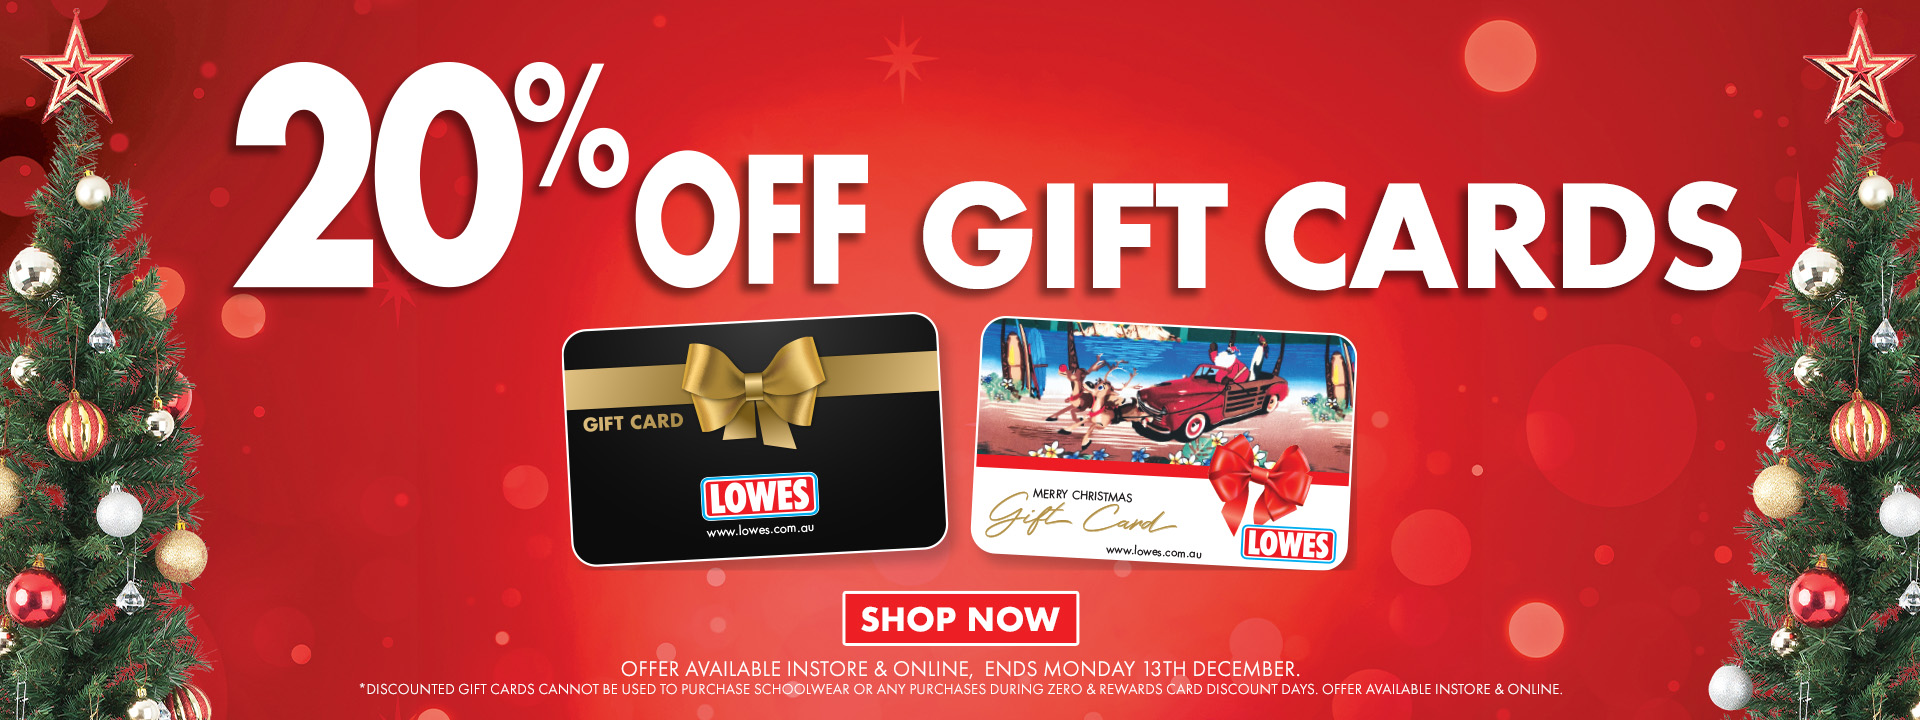 Lowes 20% OFF gift cards for Christmas